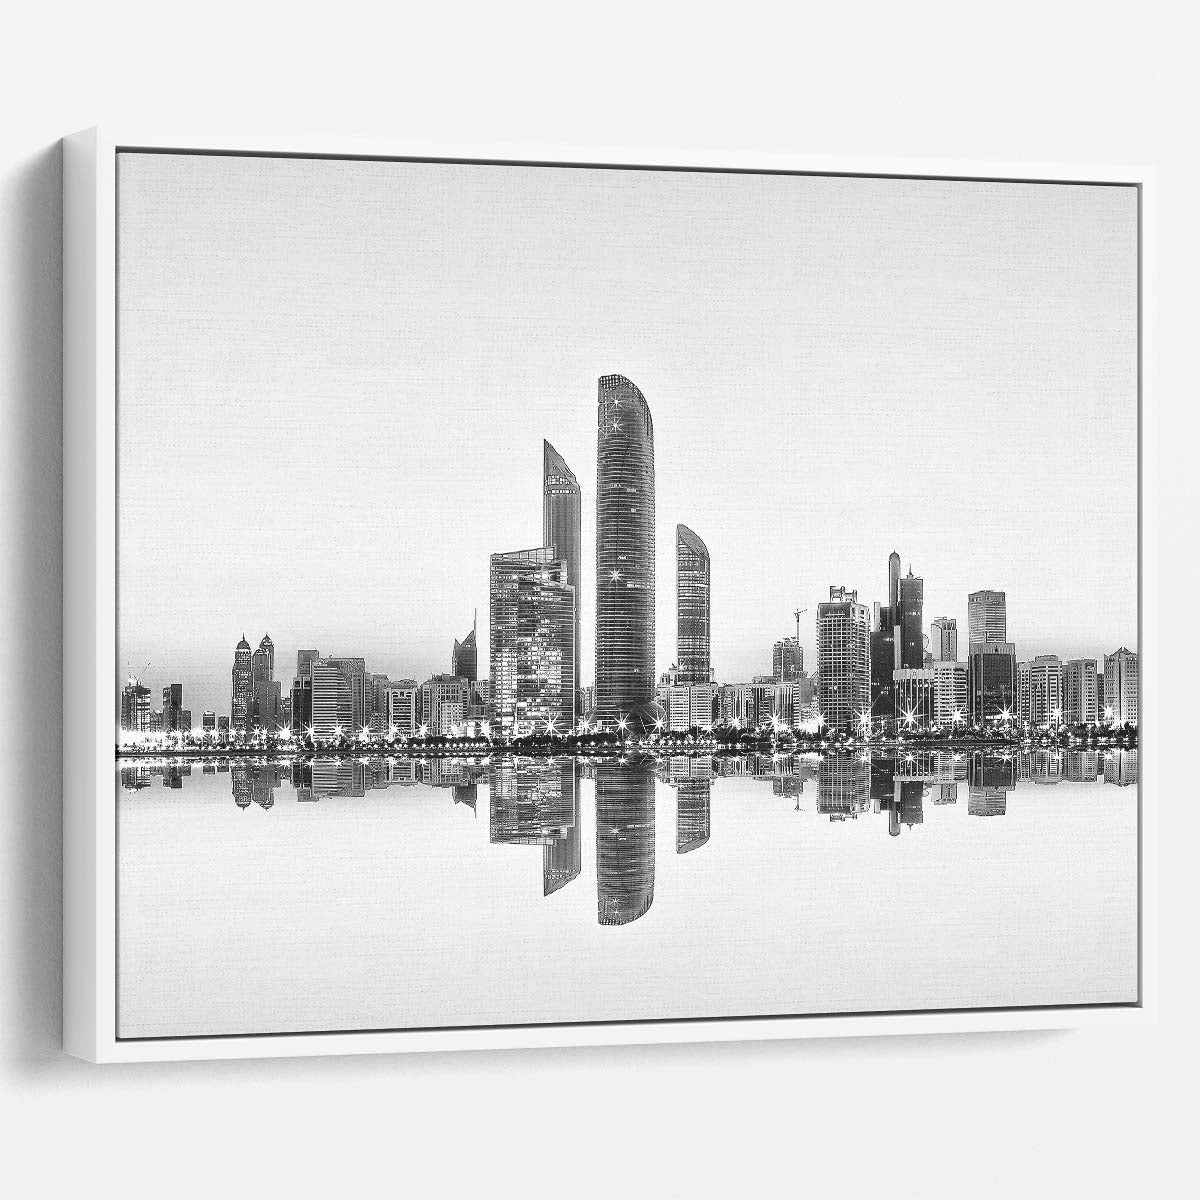 Abu Dhabi Skyline Reflections Monochrome Wall Art by Luxuriance Designs. Made in USA.